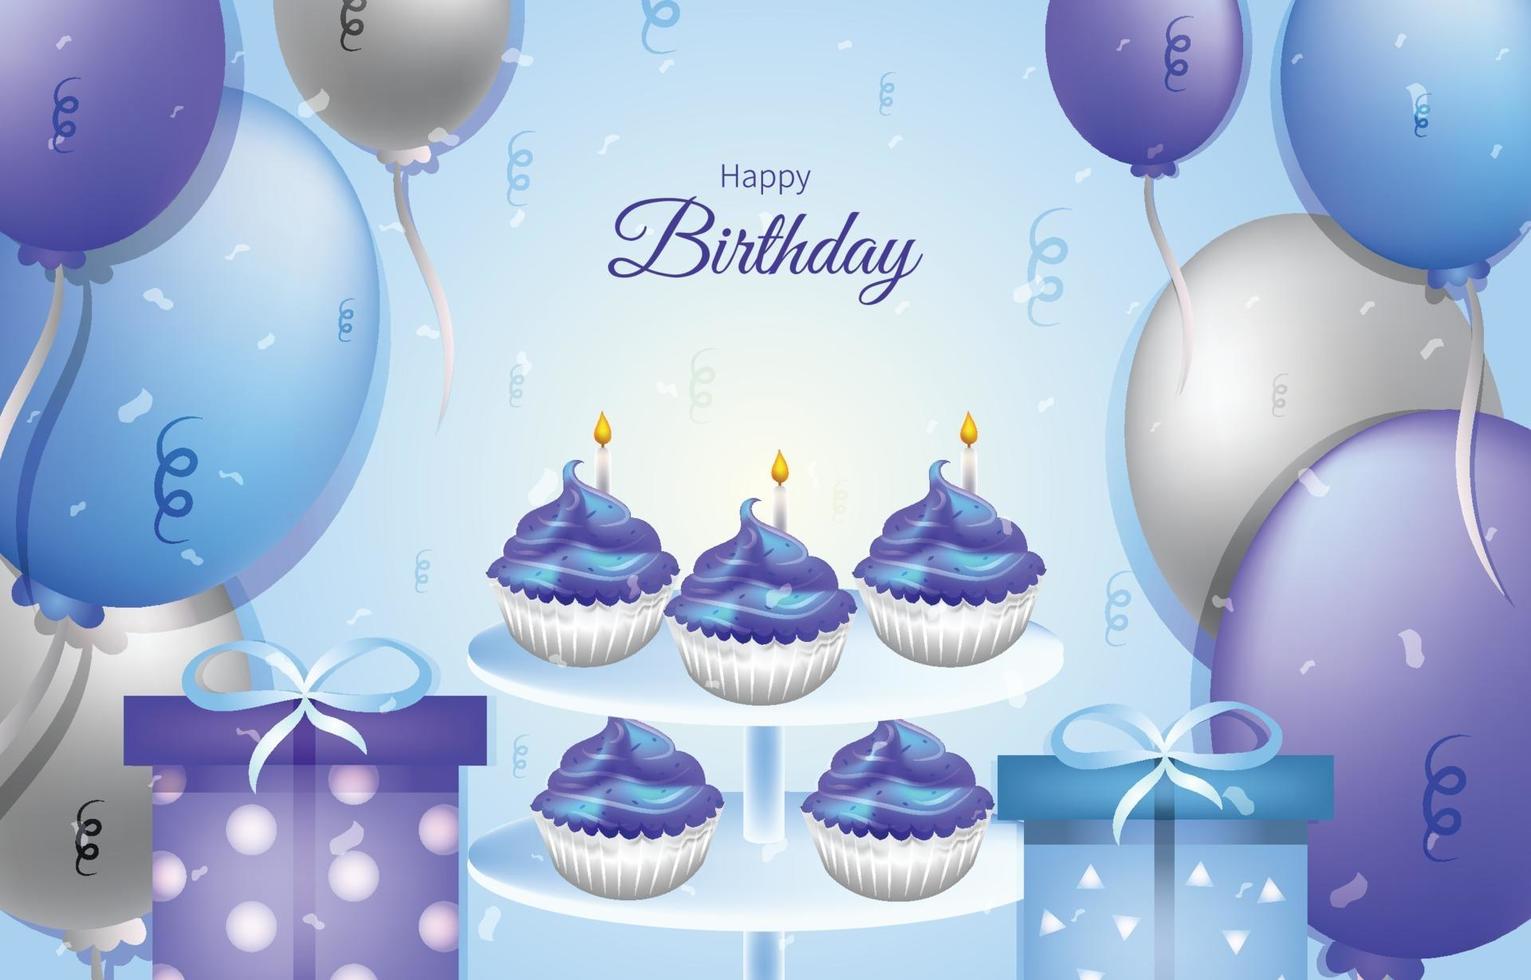 Happy Birthday Blue and Purple Background Template vector